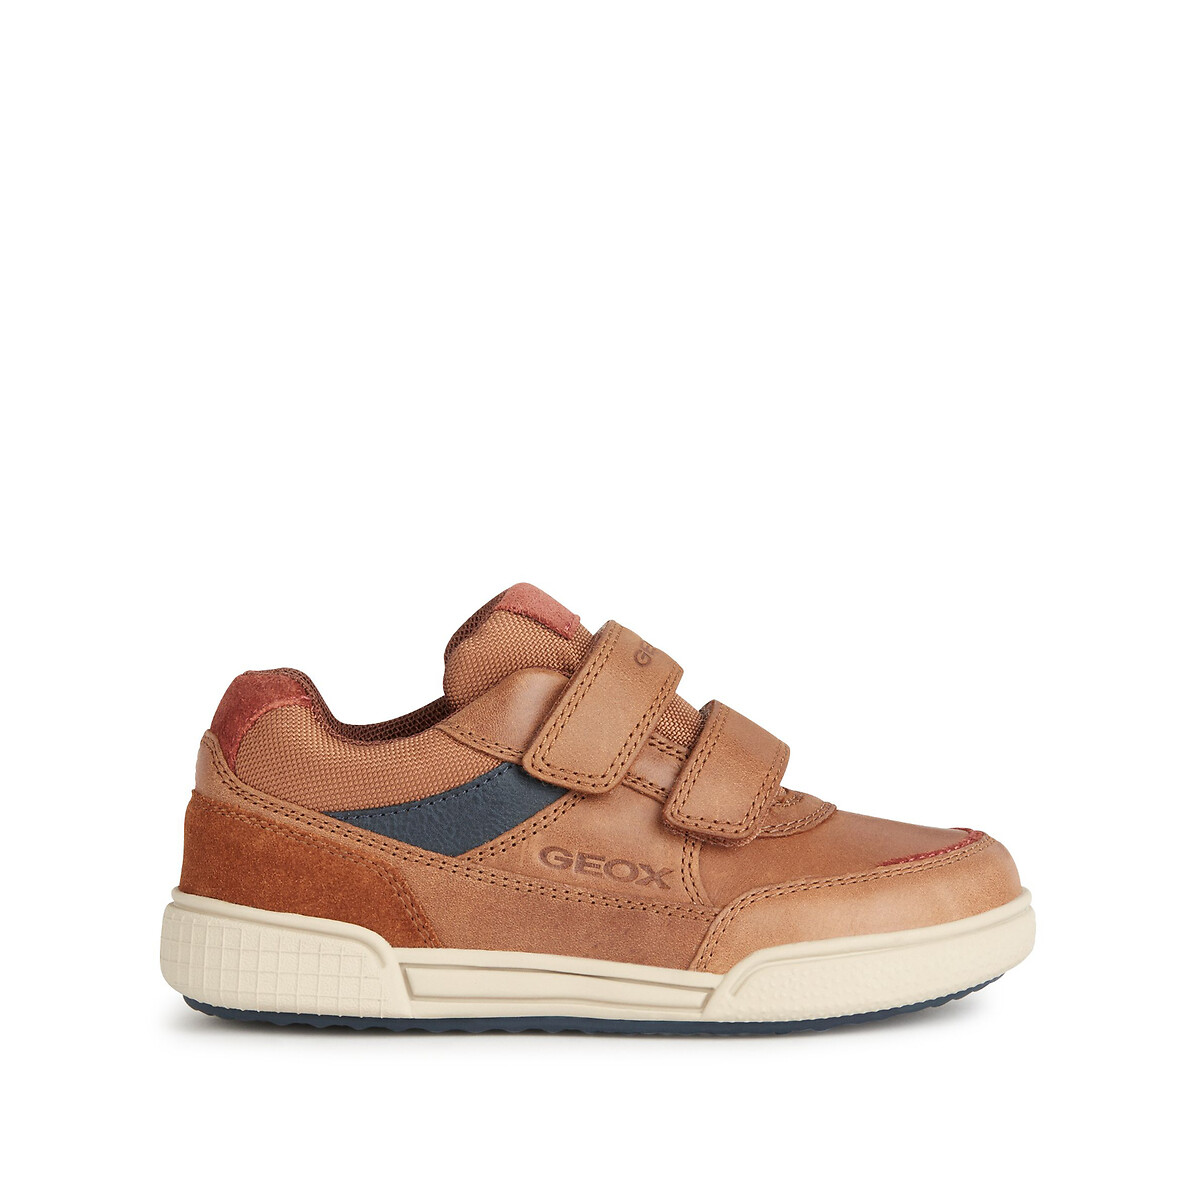 Image of Kids Poseido Breathable Trainers in Leather with Touch 'n' Close Fastening